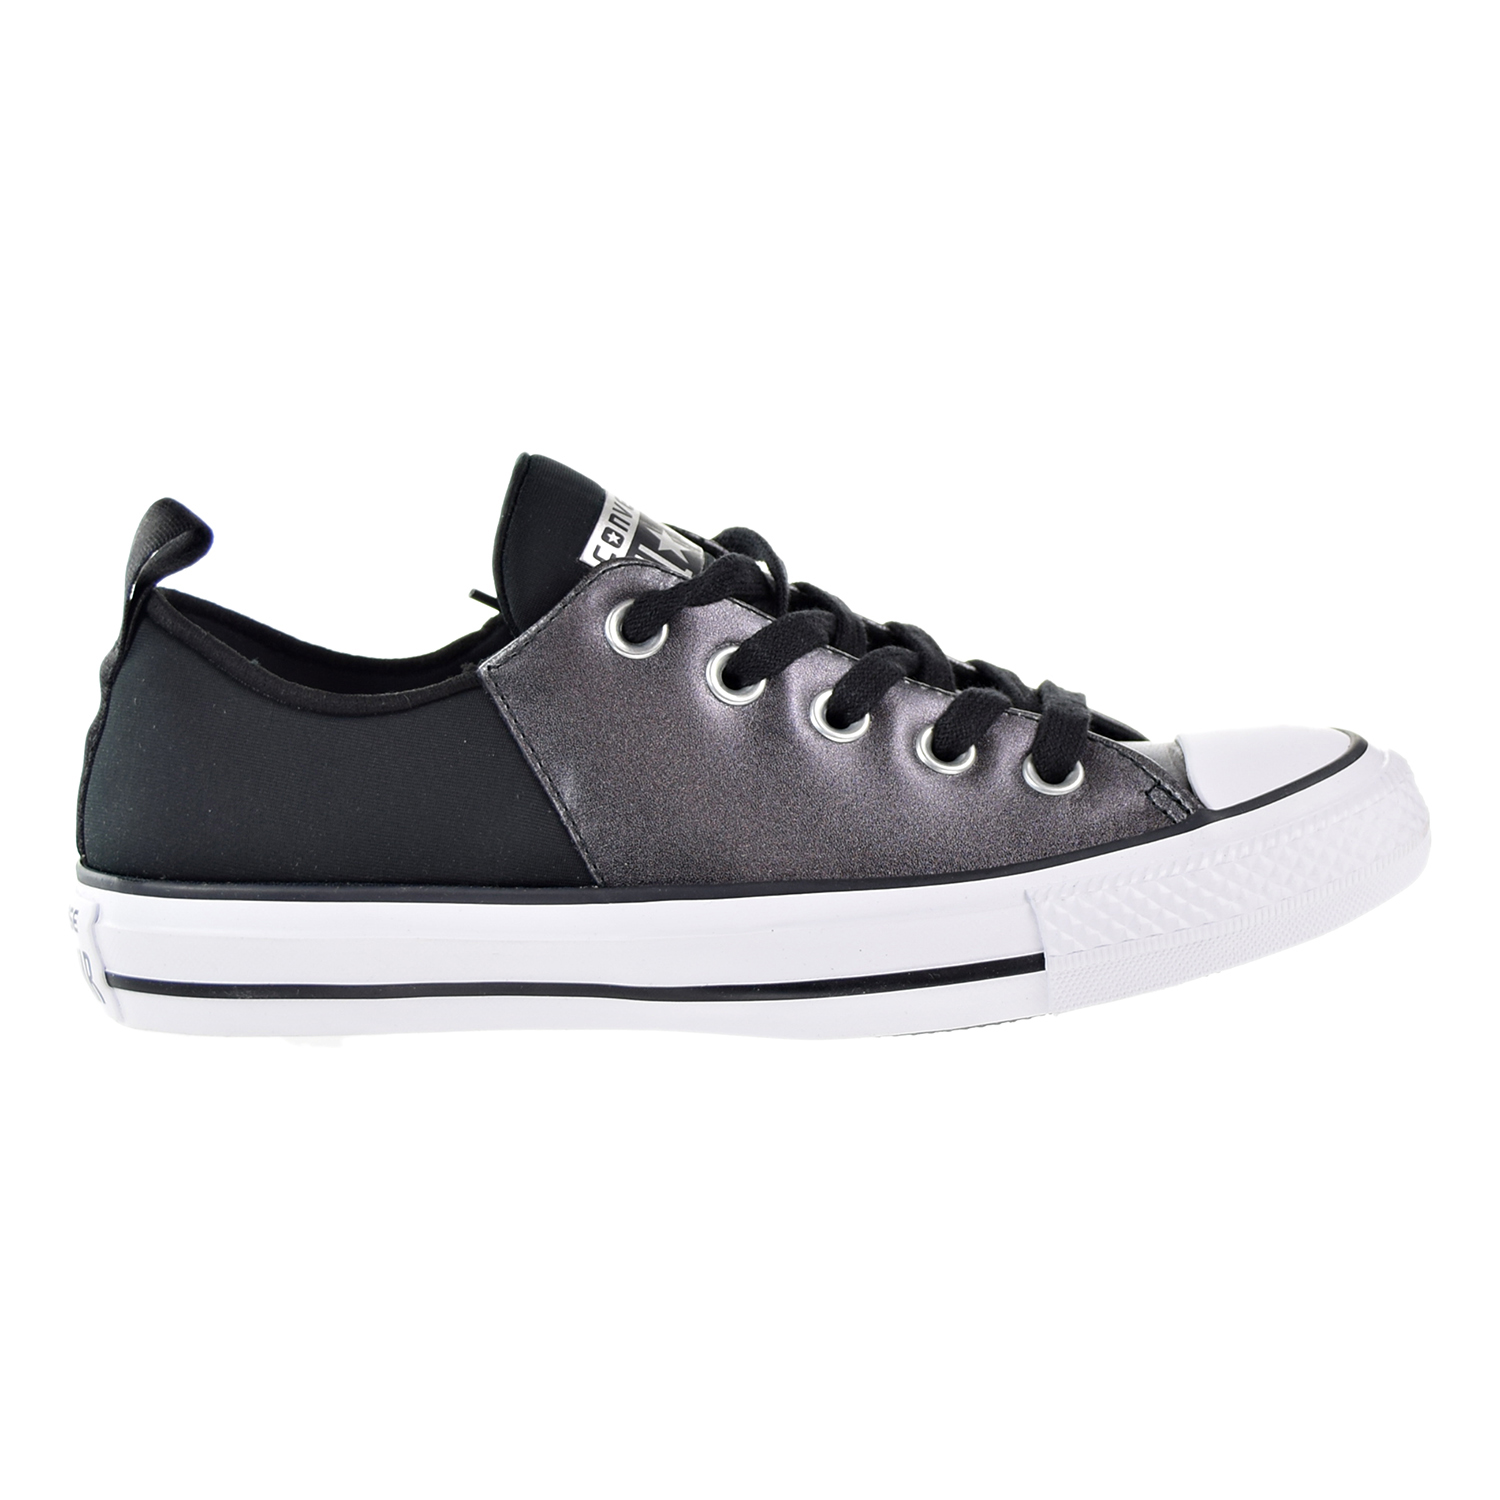 Converse Chuck Taylor All Star Sloane Glam Leather Low Top Women's Shoe Black/White555835c - image 1 of 6